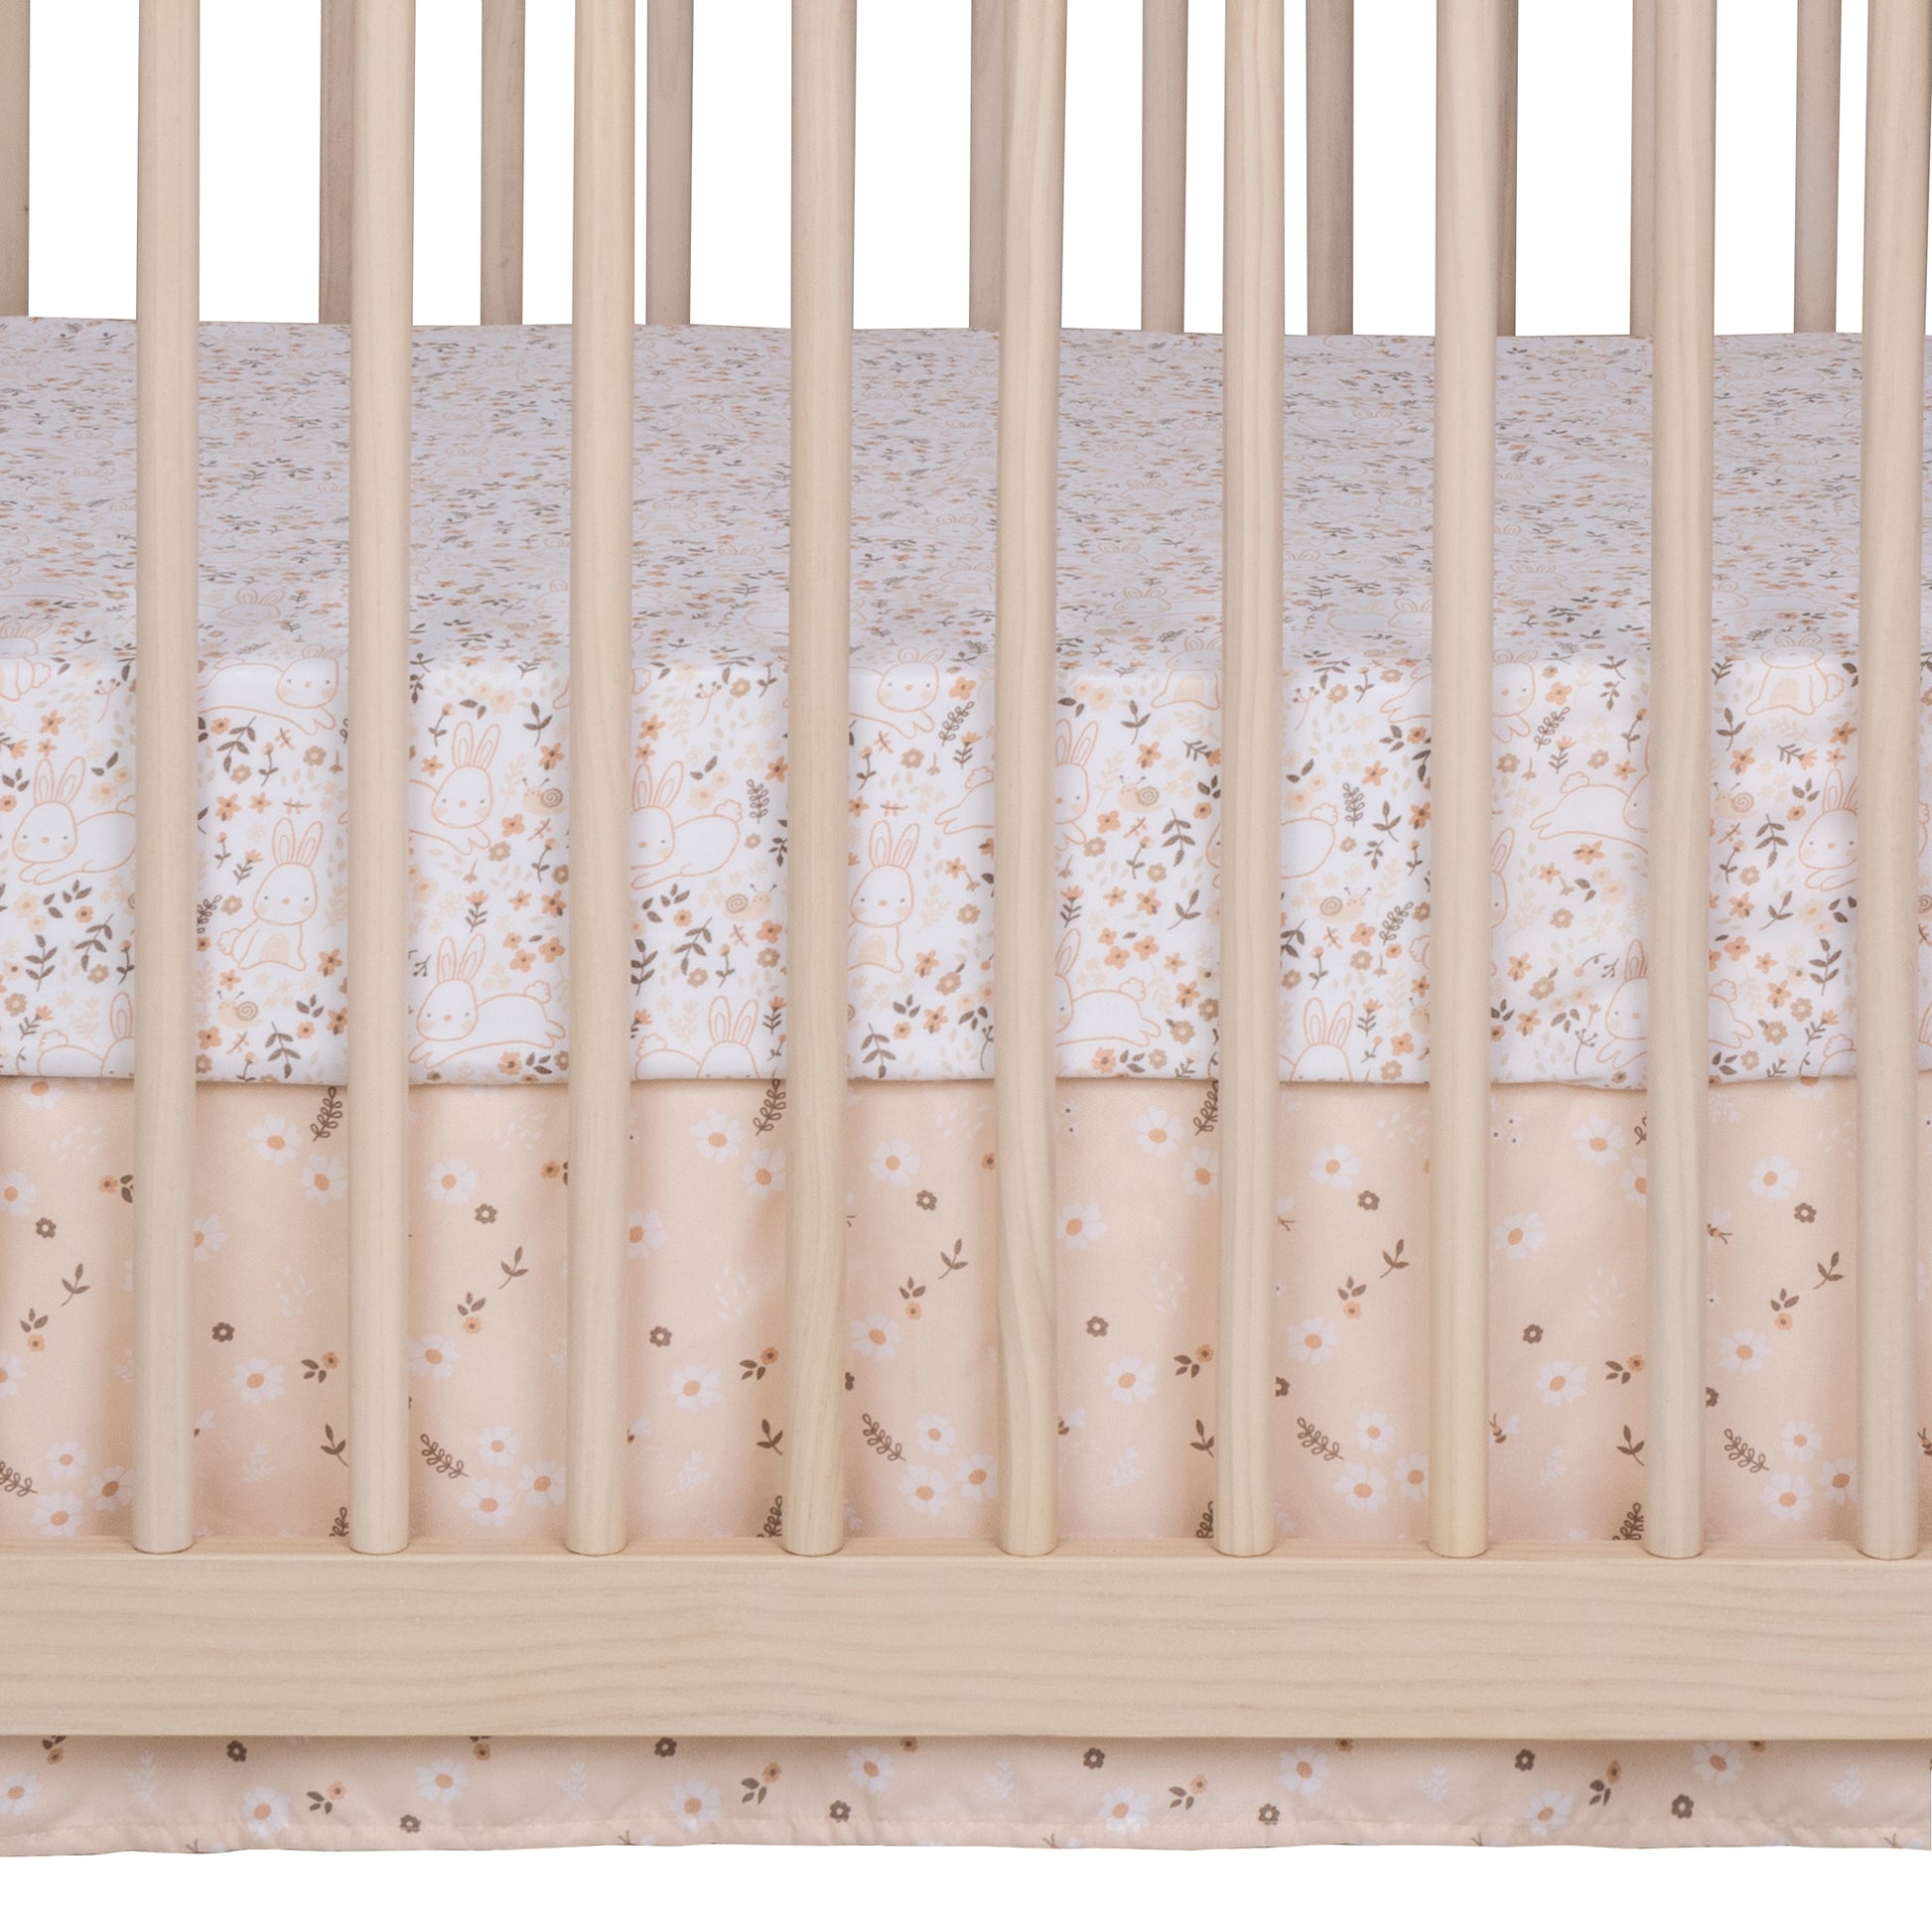 Cottage Floral crib sheet and crib skirt